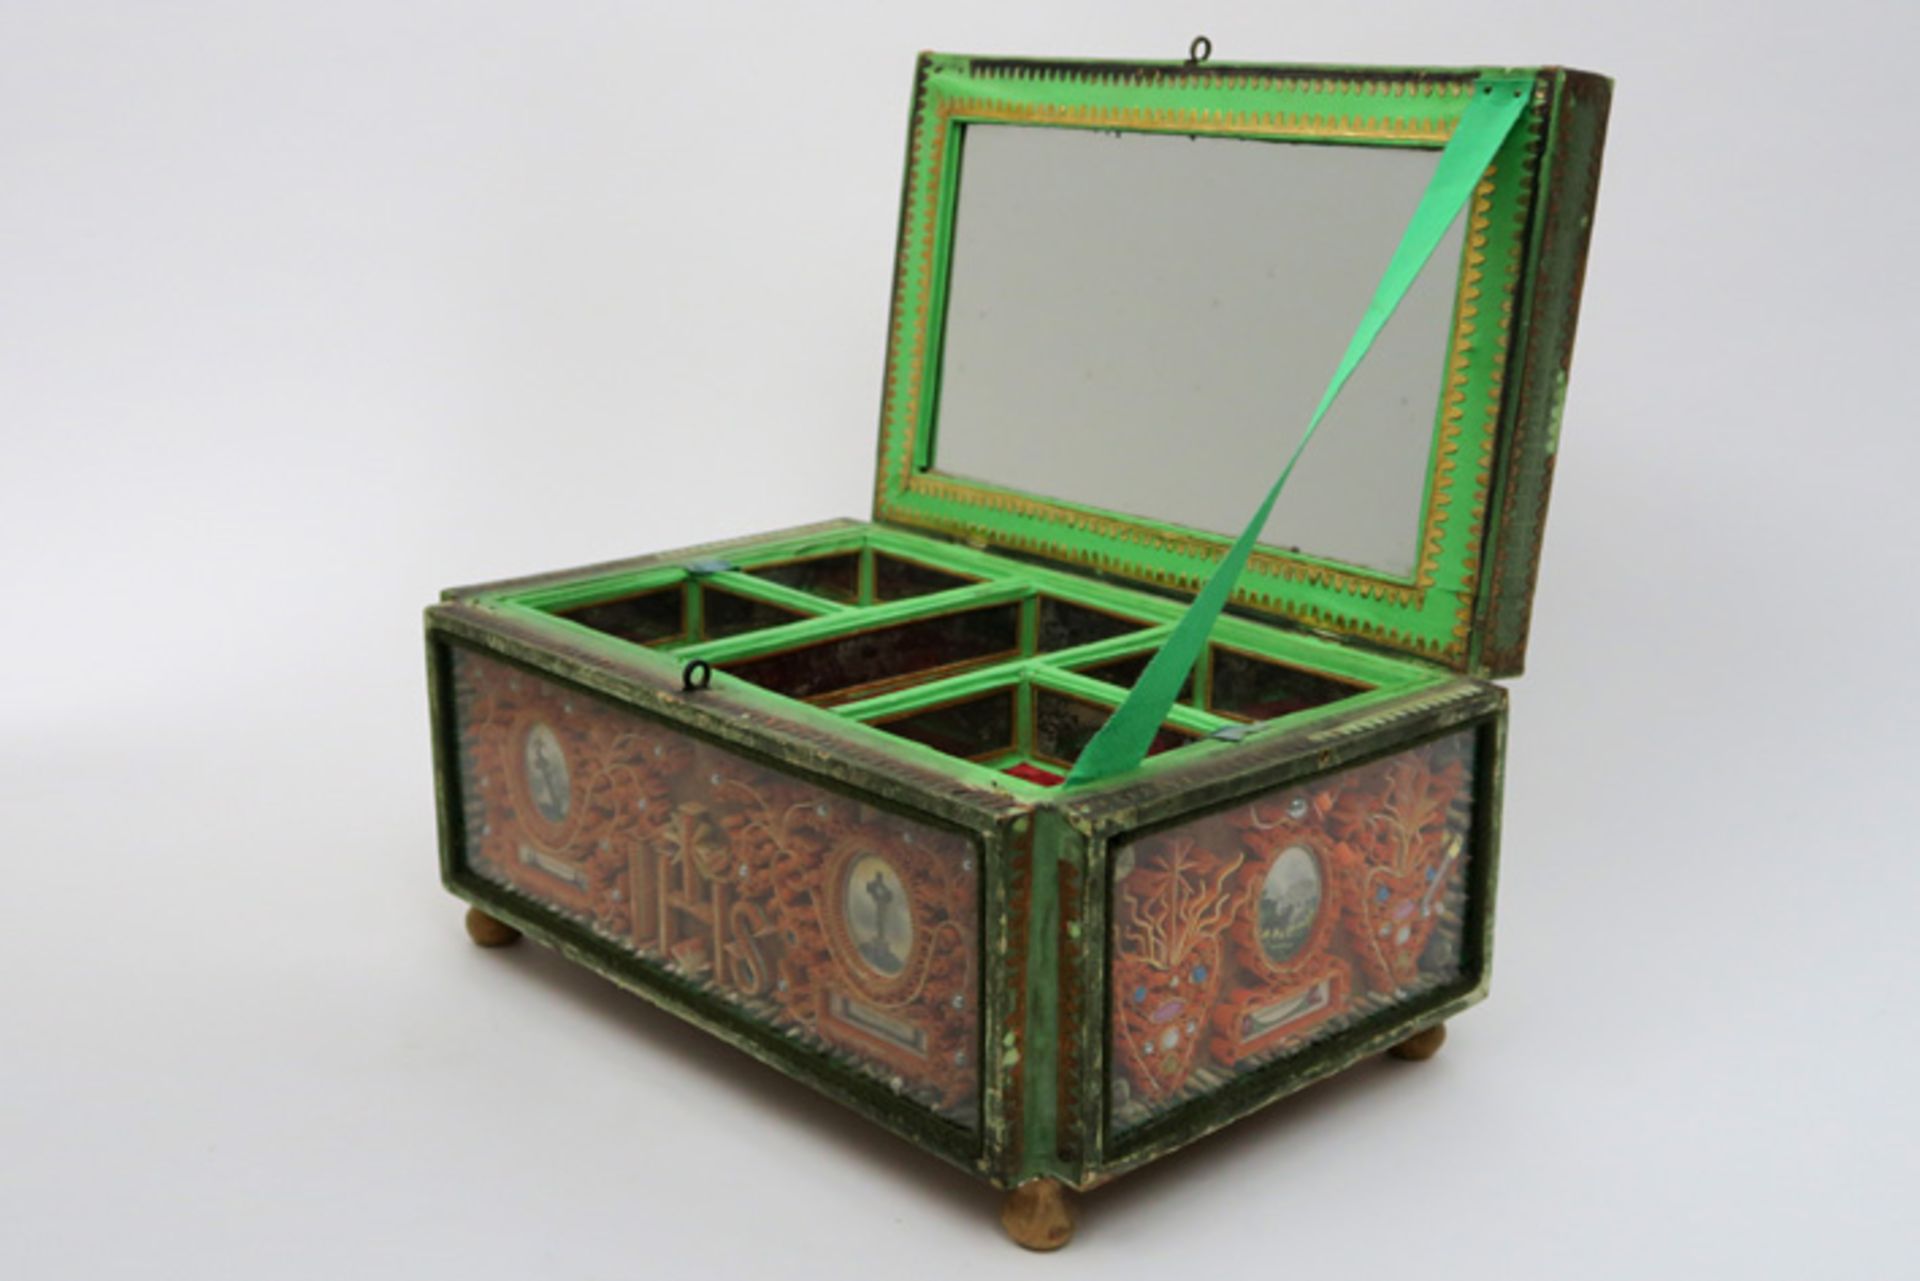 19th "Folk Art" box in painted wood and glass with relics VOLKSKUNST - 19° EEUW kistje in - Image 2 of 5